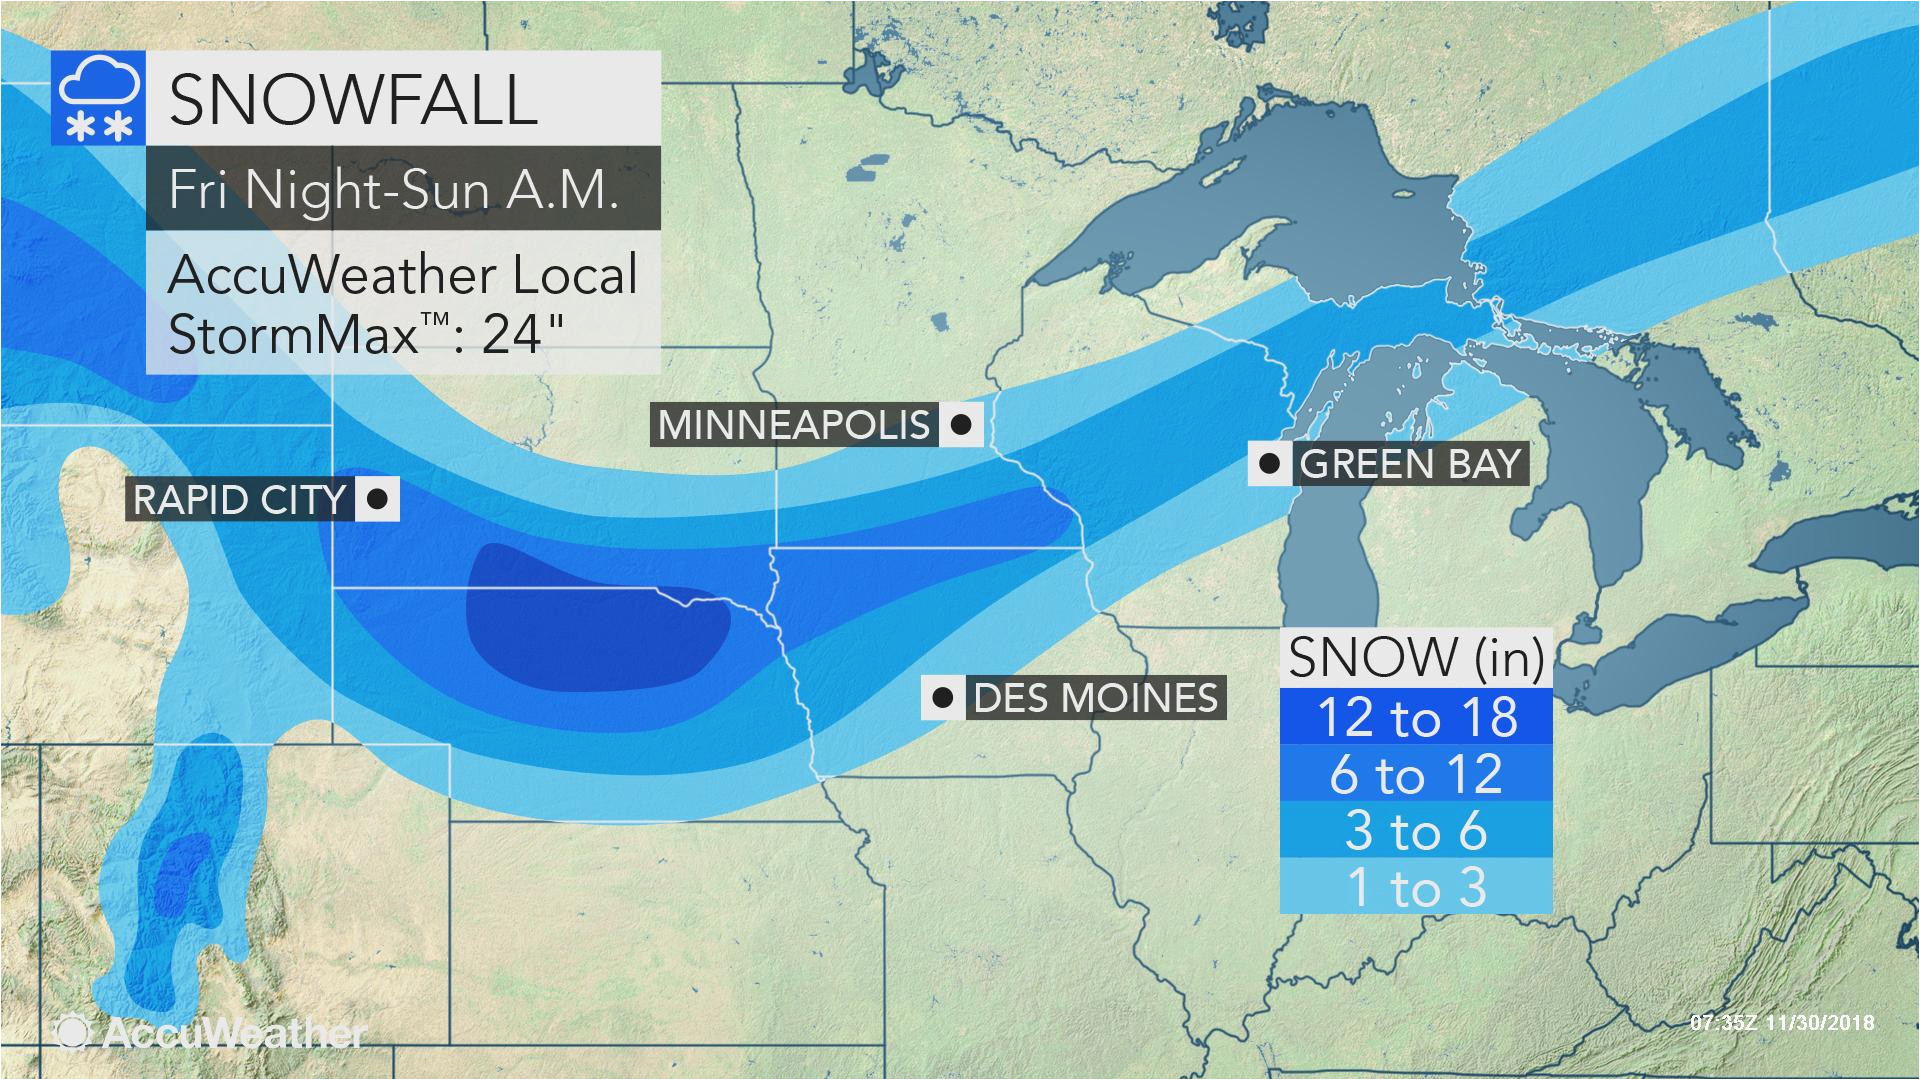 2nd blizzard of season to eye north central us during 1st weekend of